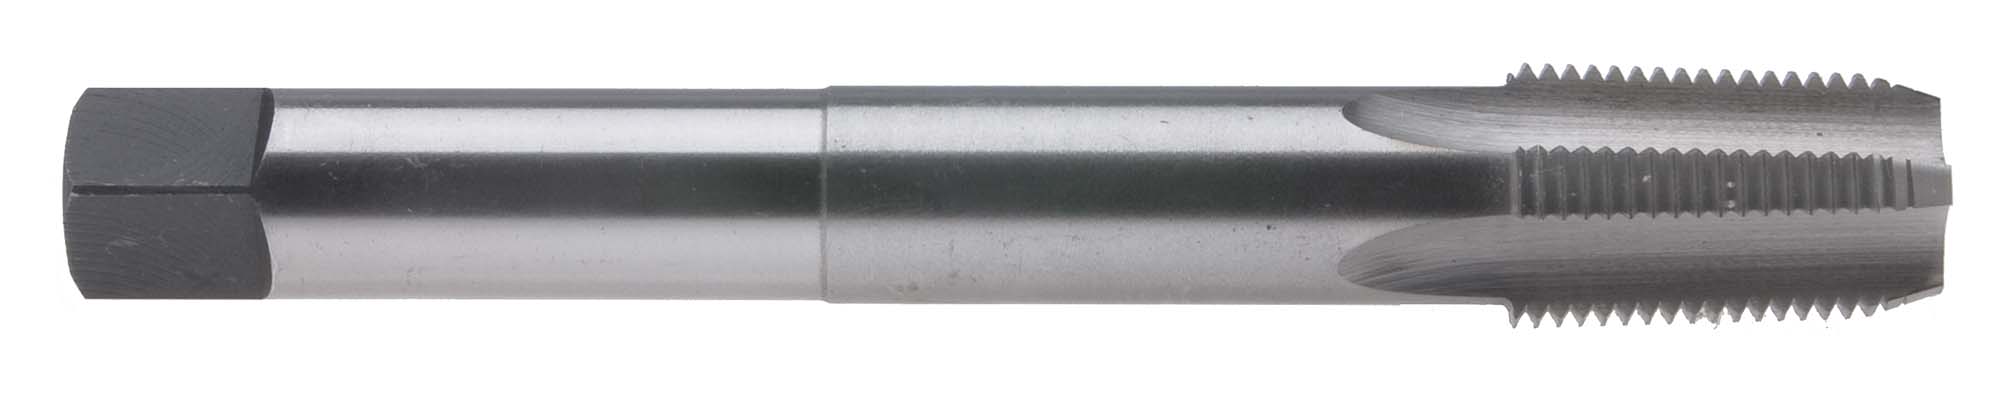 1/2"-14 6" Long National Pipe Taper High Speed Steel Pipe Tap